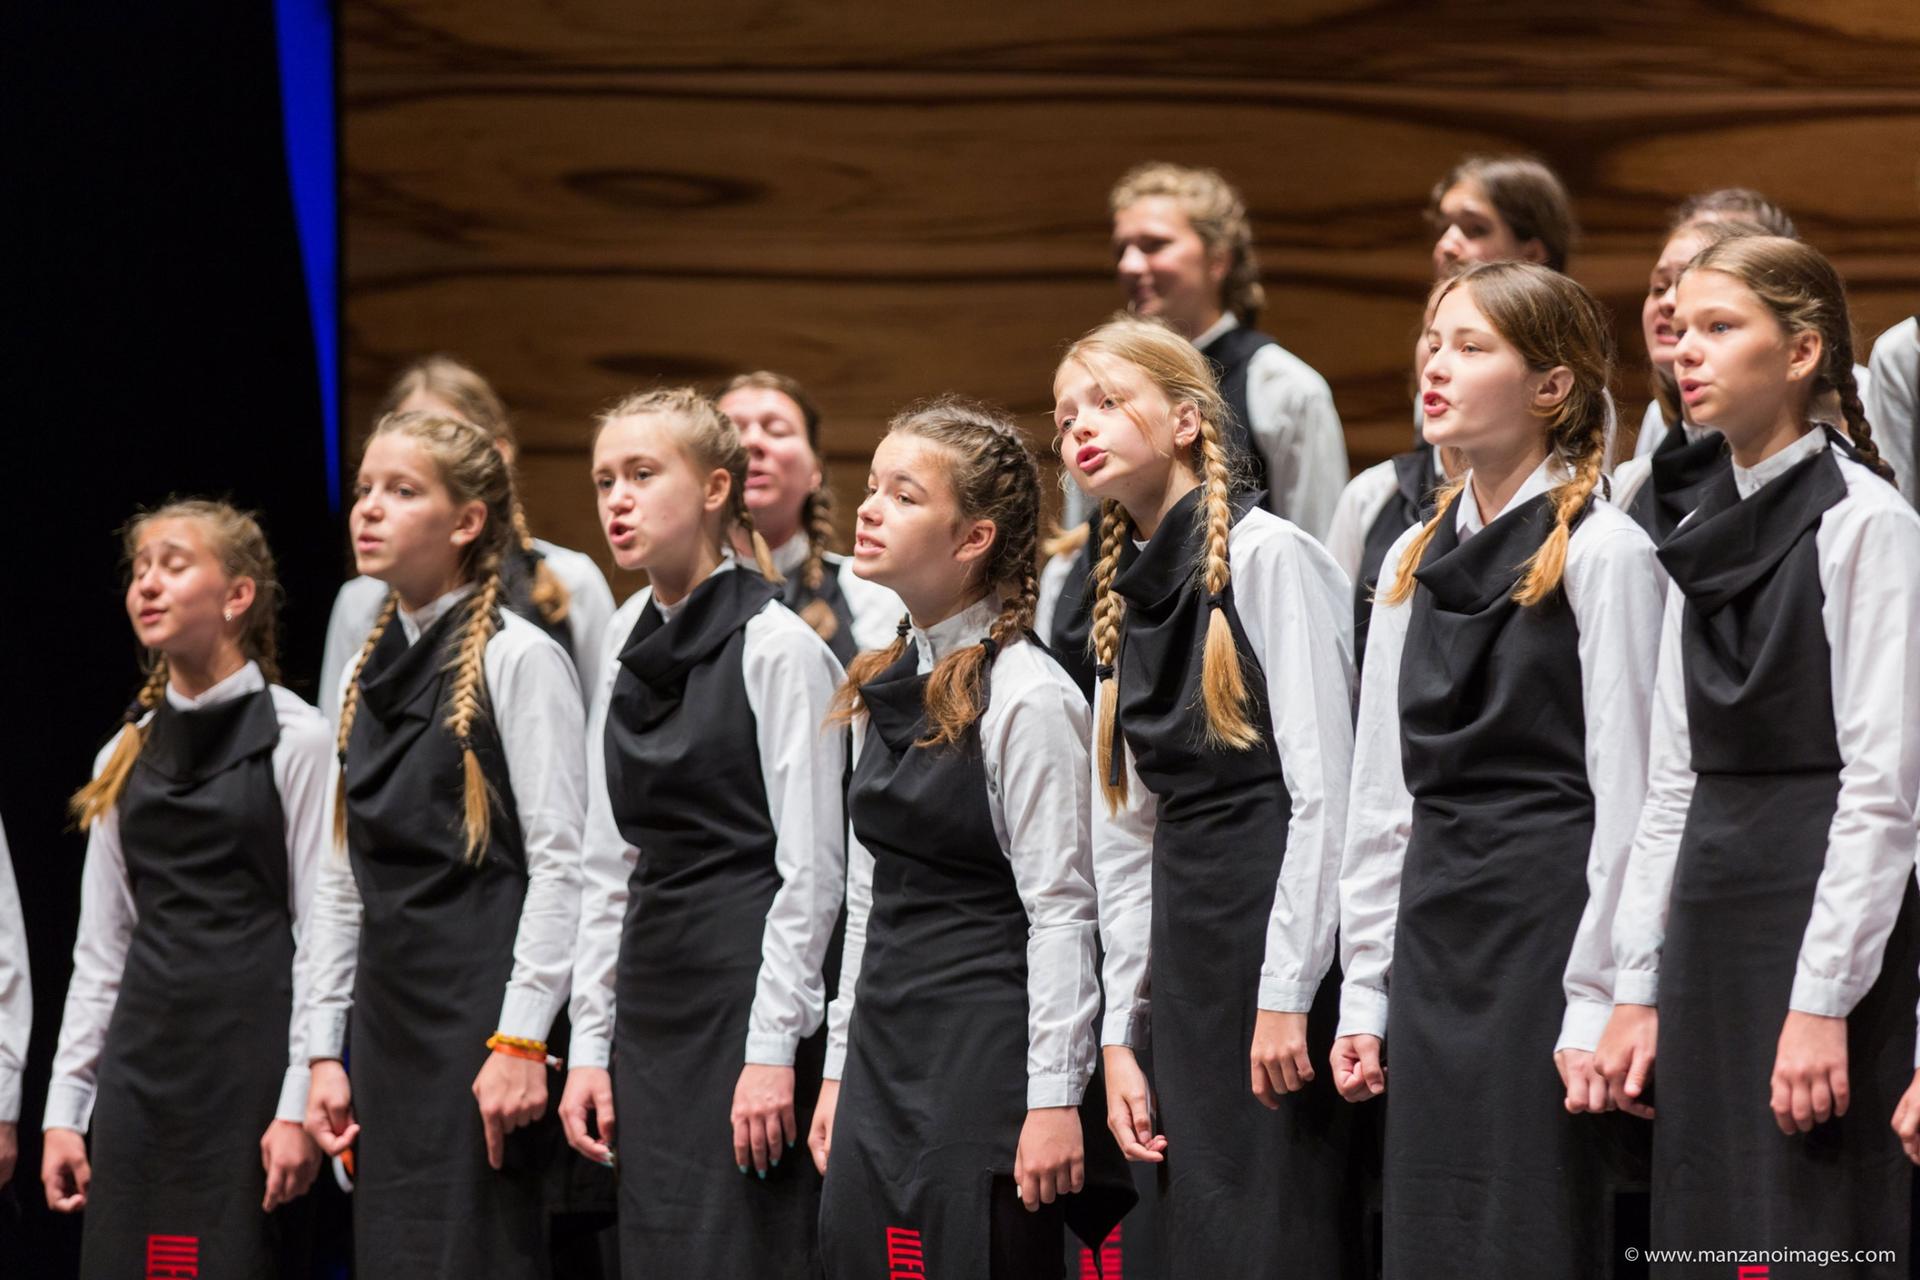 Shchedryk Children’s Choir from Kyiv, won first place at the Summa Cum Laude Youth Music Festival. 